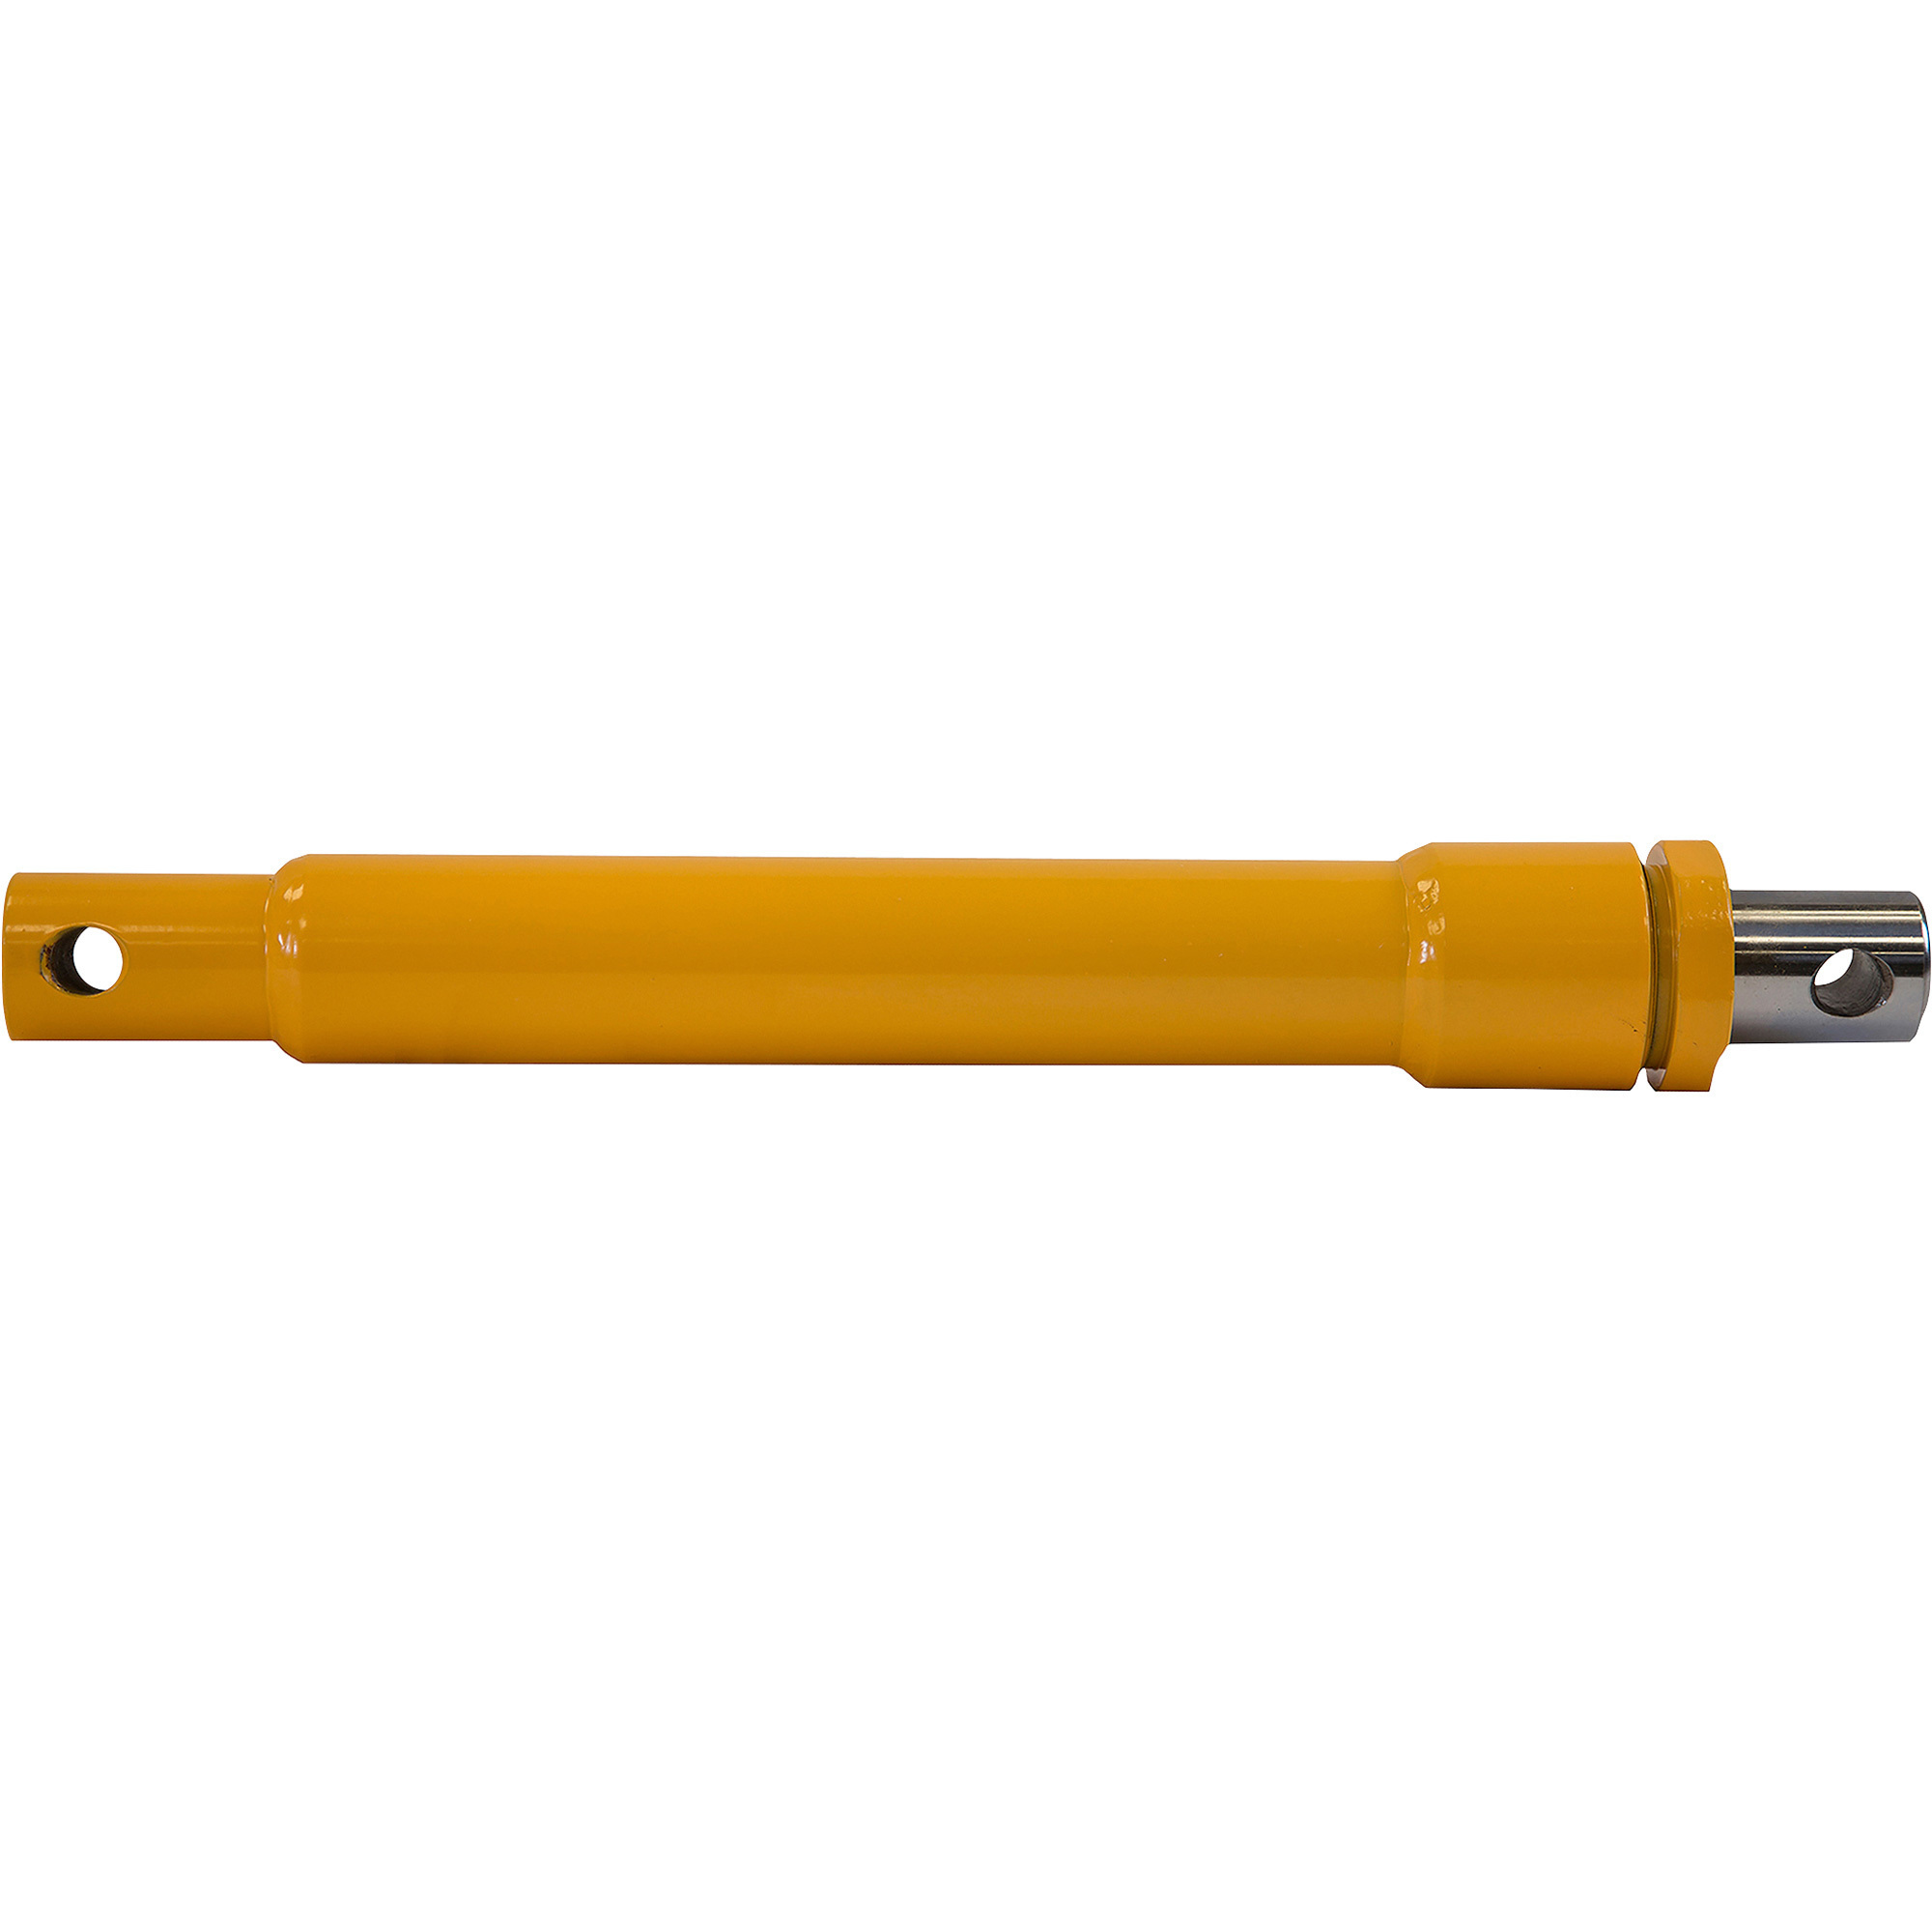 S.A.M. Replacement Hydraulic Cylinder For Meyer Plows, Model 1304010